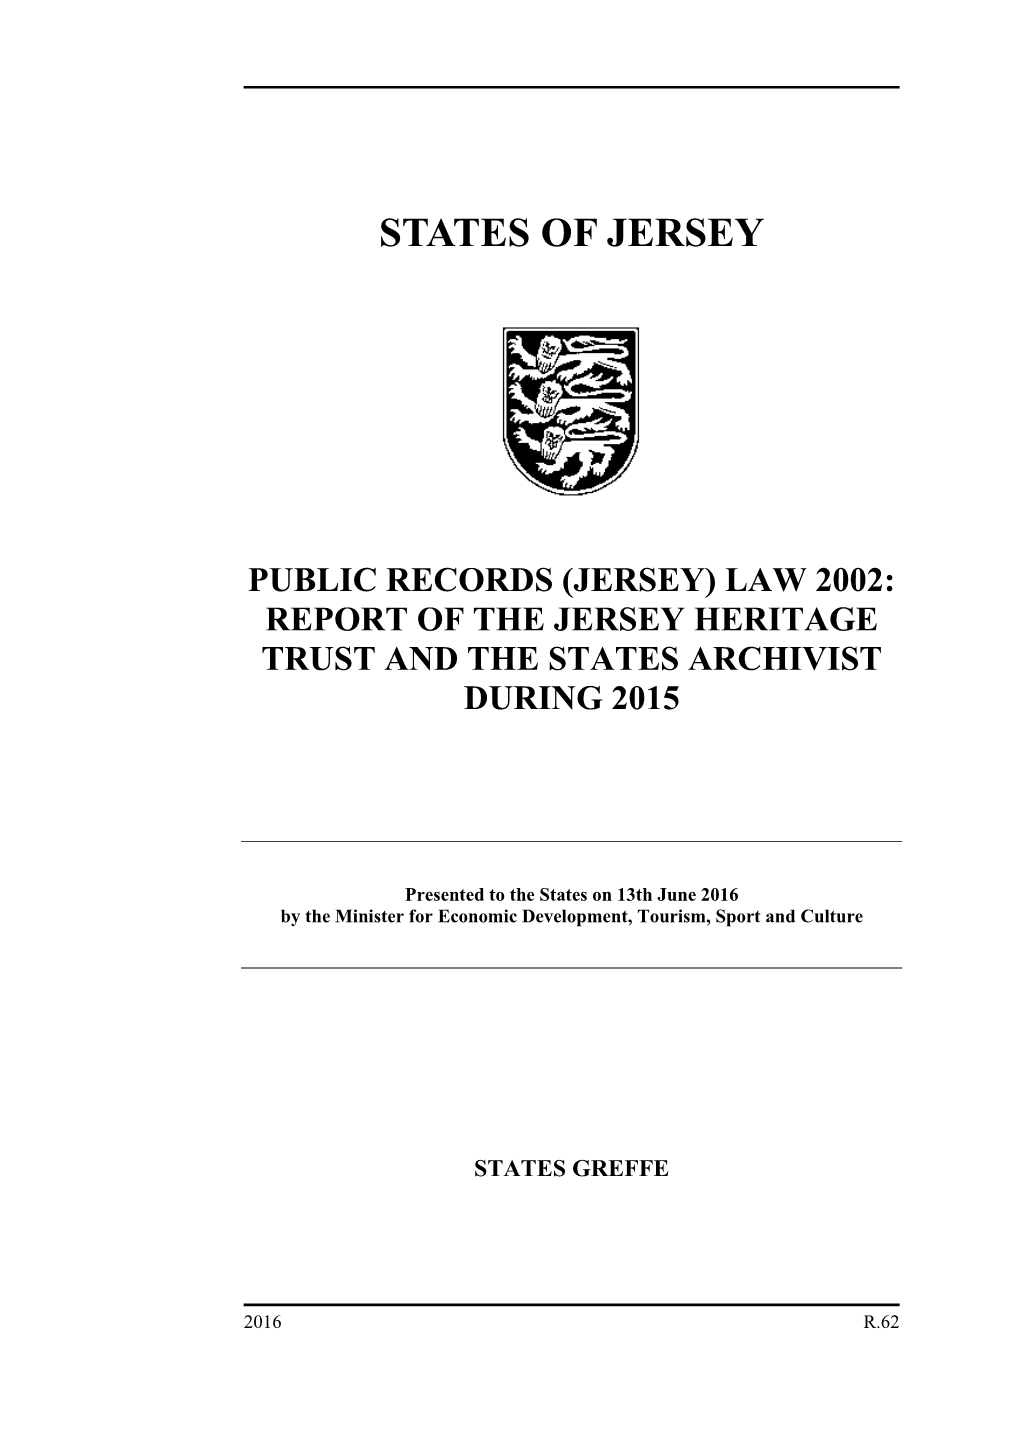 Public Records (Jersey) Law 2002: Report of the Jersey Heritage Trust and the States Archivist During 2015